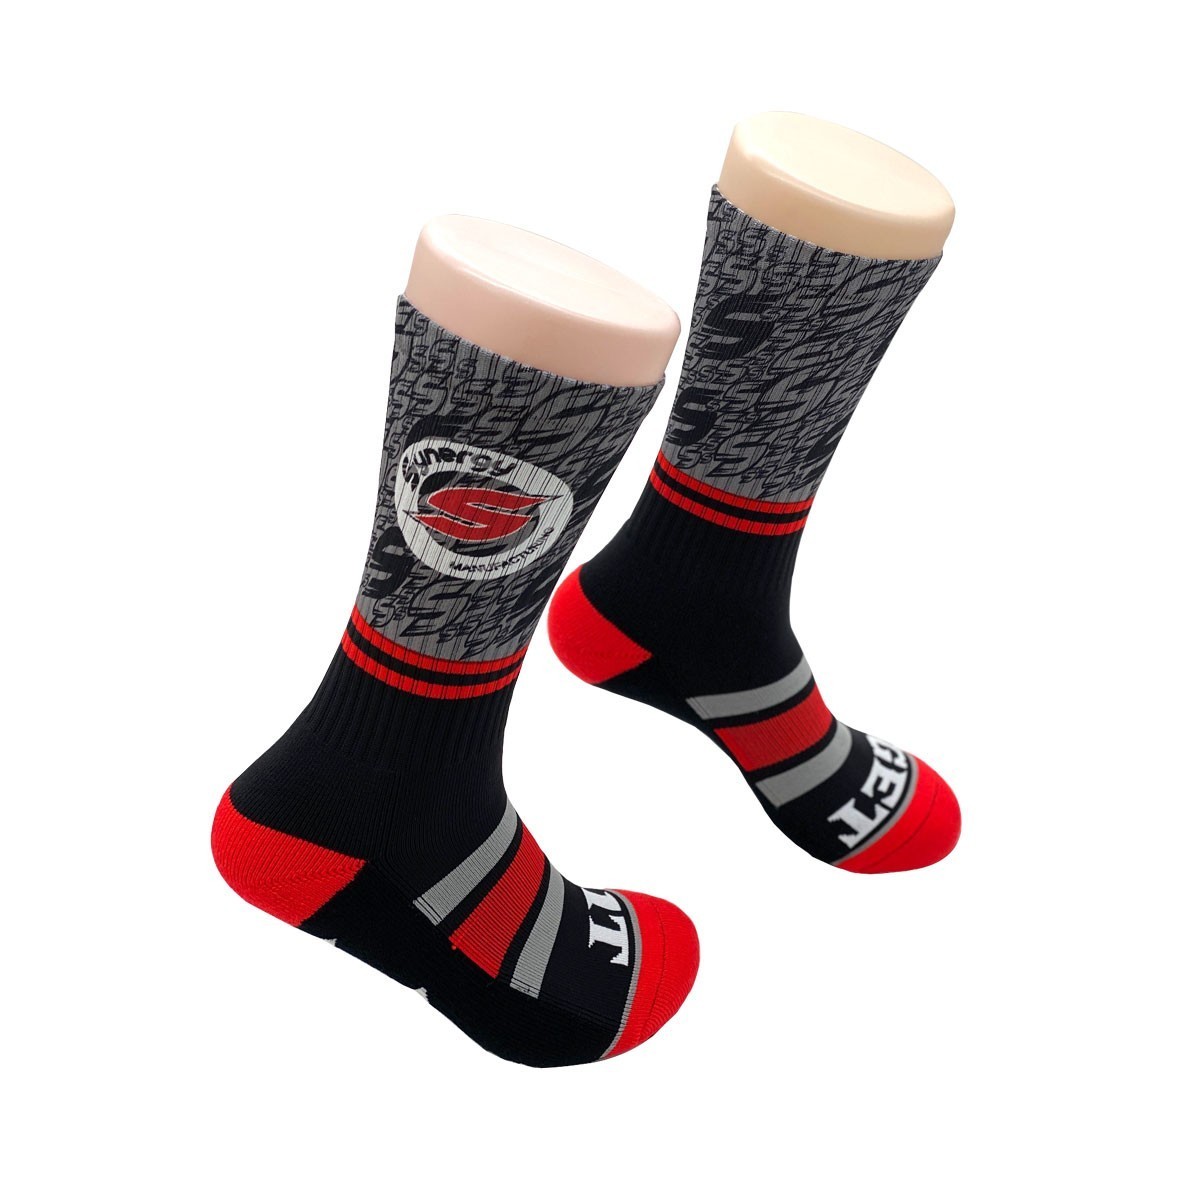 Synergy Manufacturing "Get It" Comfort Socks